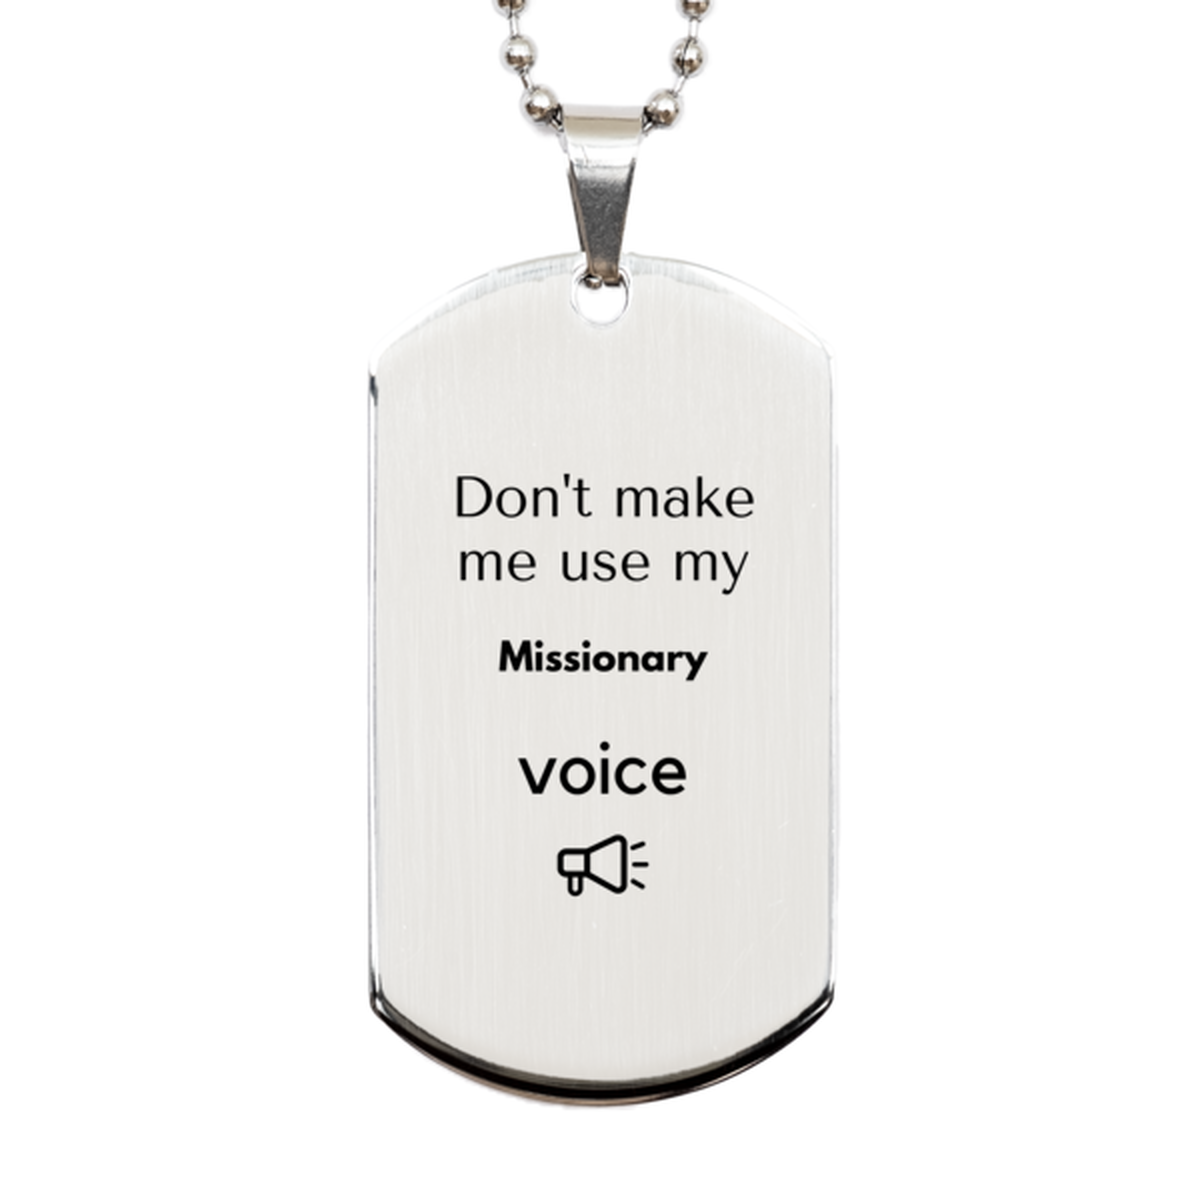 Don't make me use my Missionary voice, Sarcasm Missionary Gifts, Christmas Missionary Silver Dog Tag Birthday Unique Gifts For Missionary Coworkers, Men, Women, Colleague, Friends